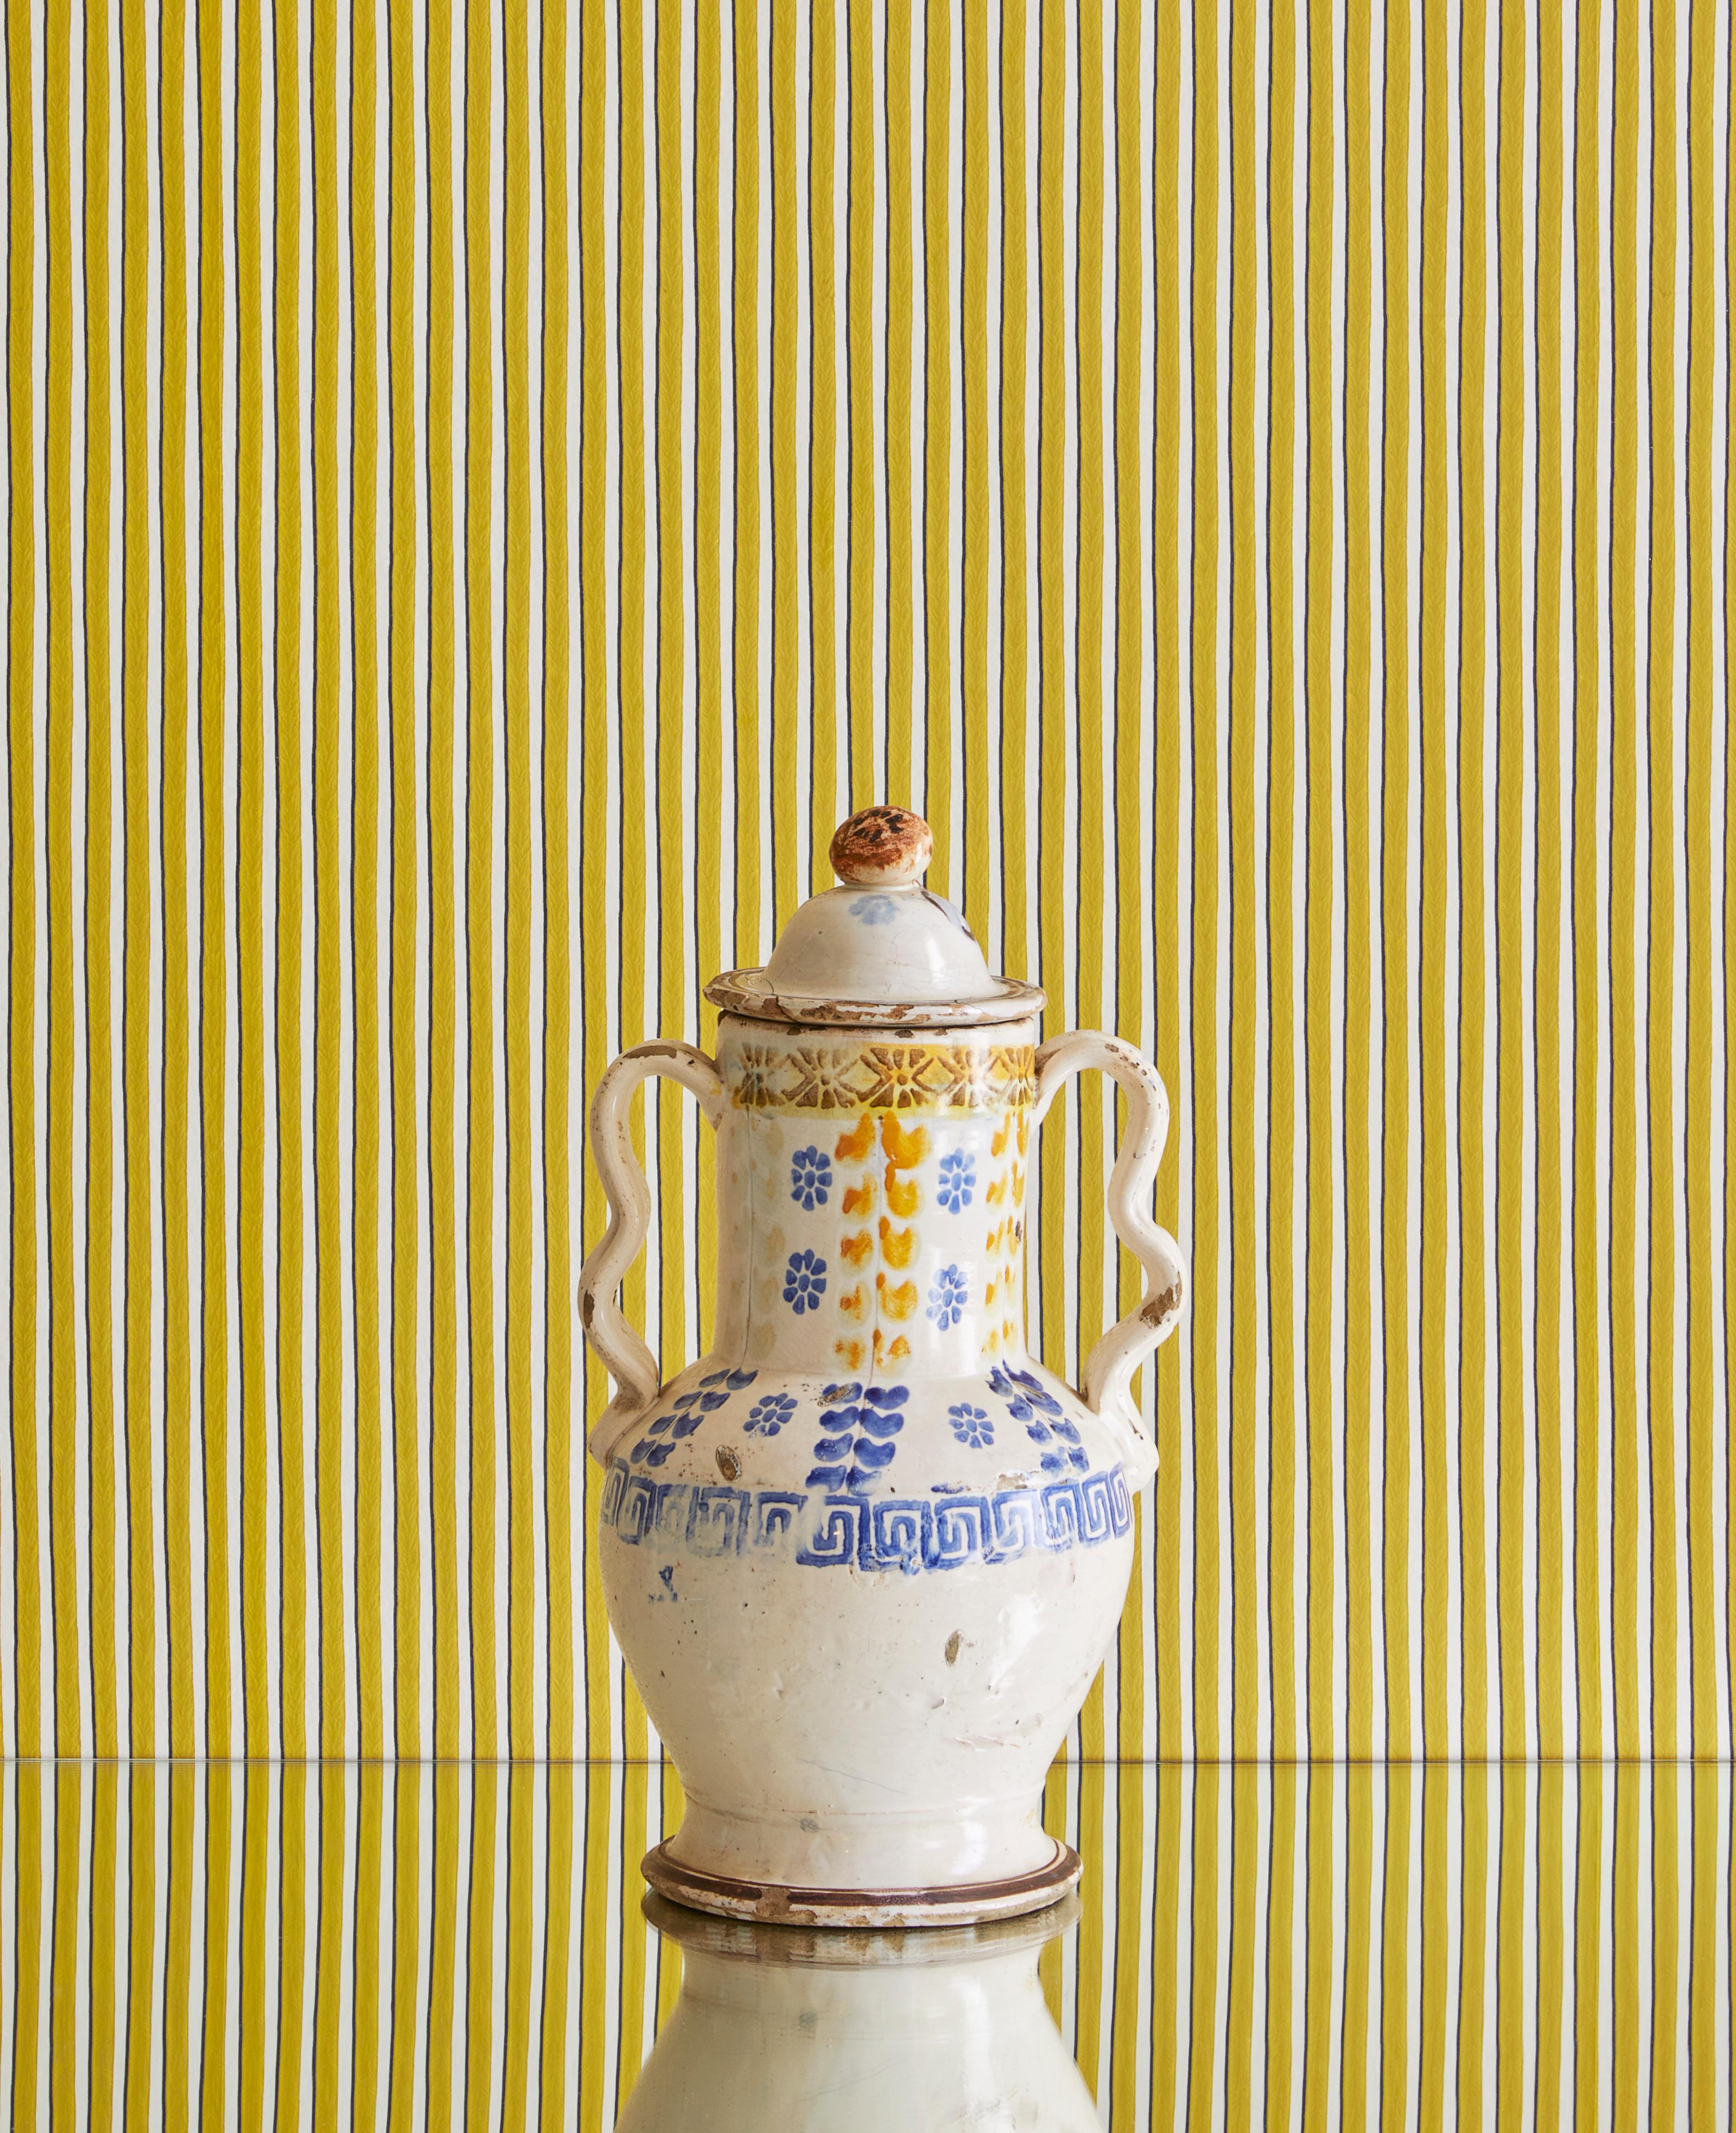 Italy, late 19th century

Ceramic jar with handles from Grottaglie.


